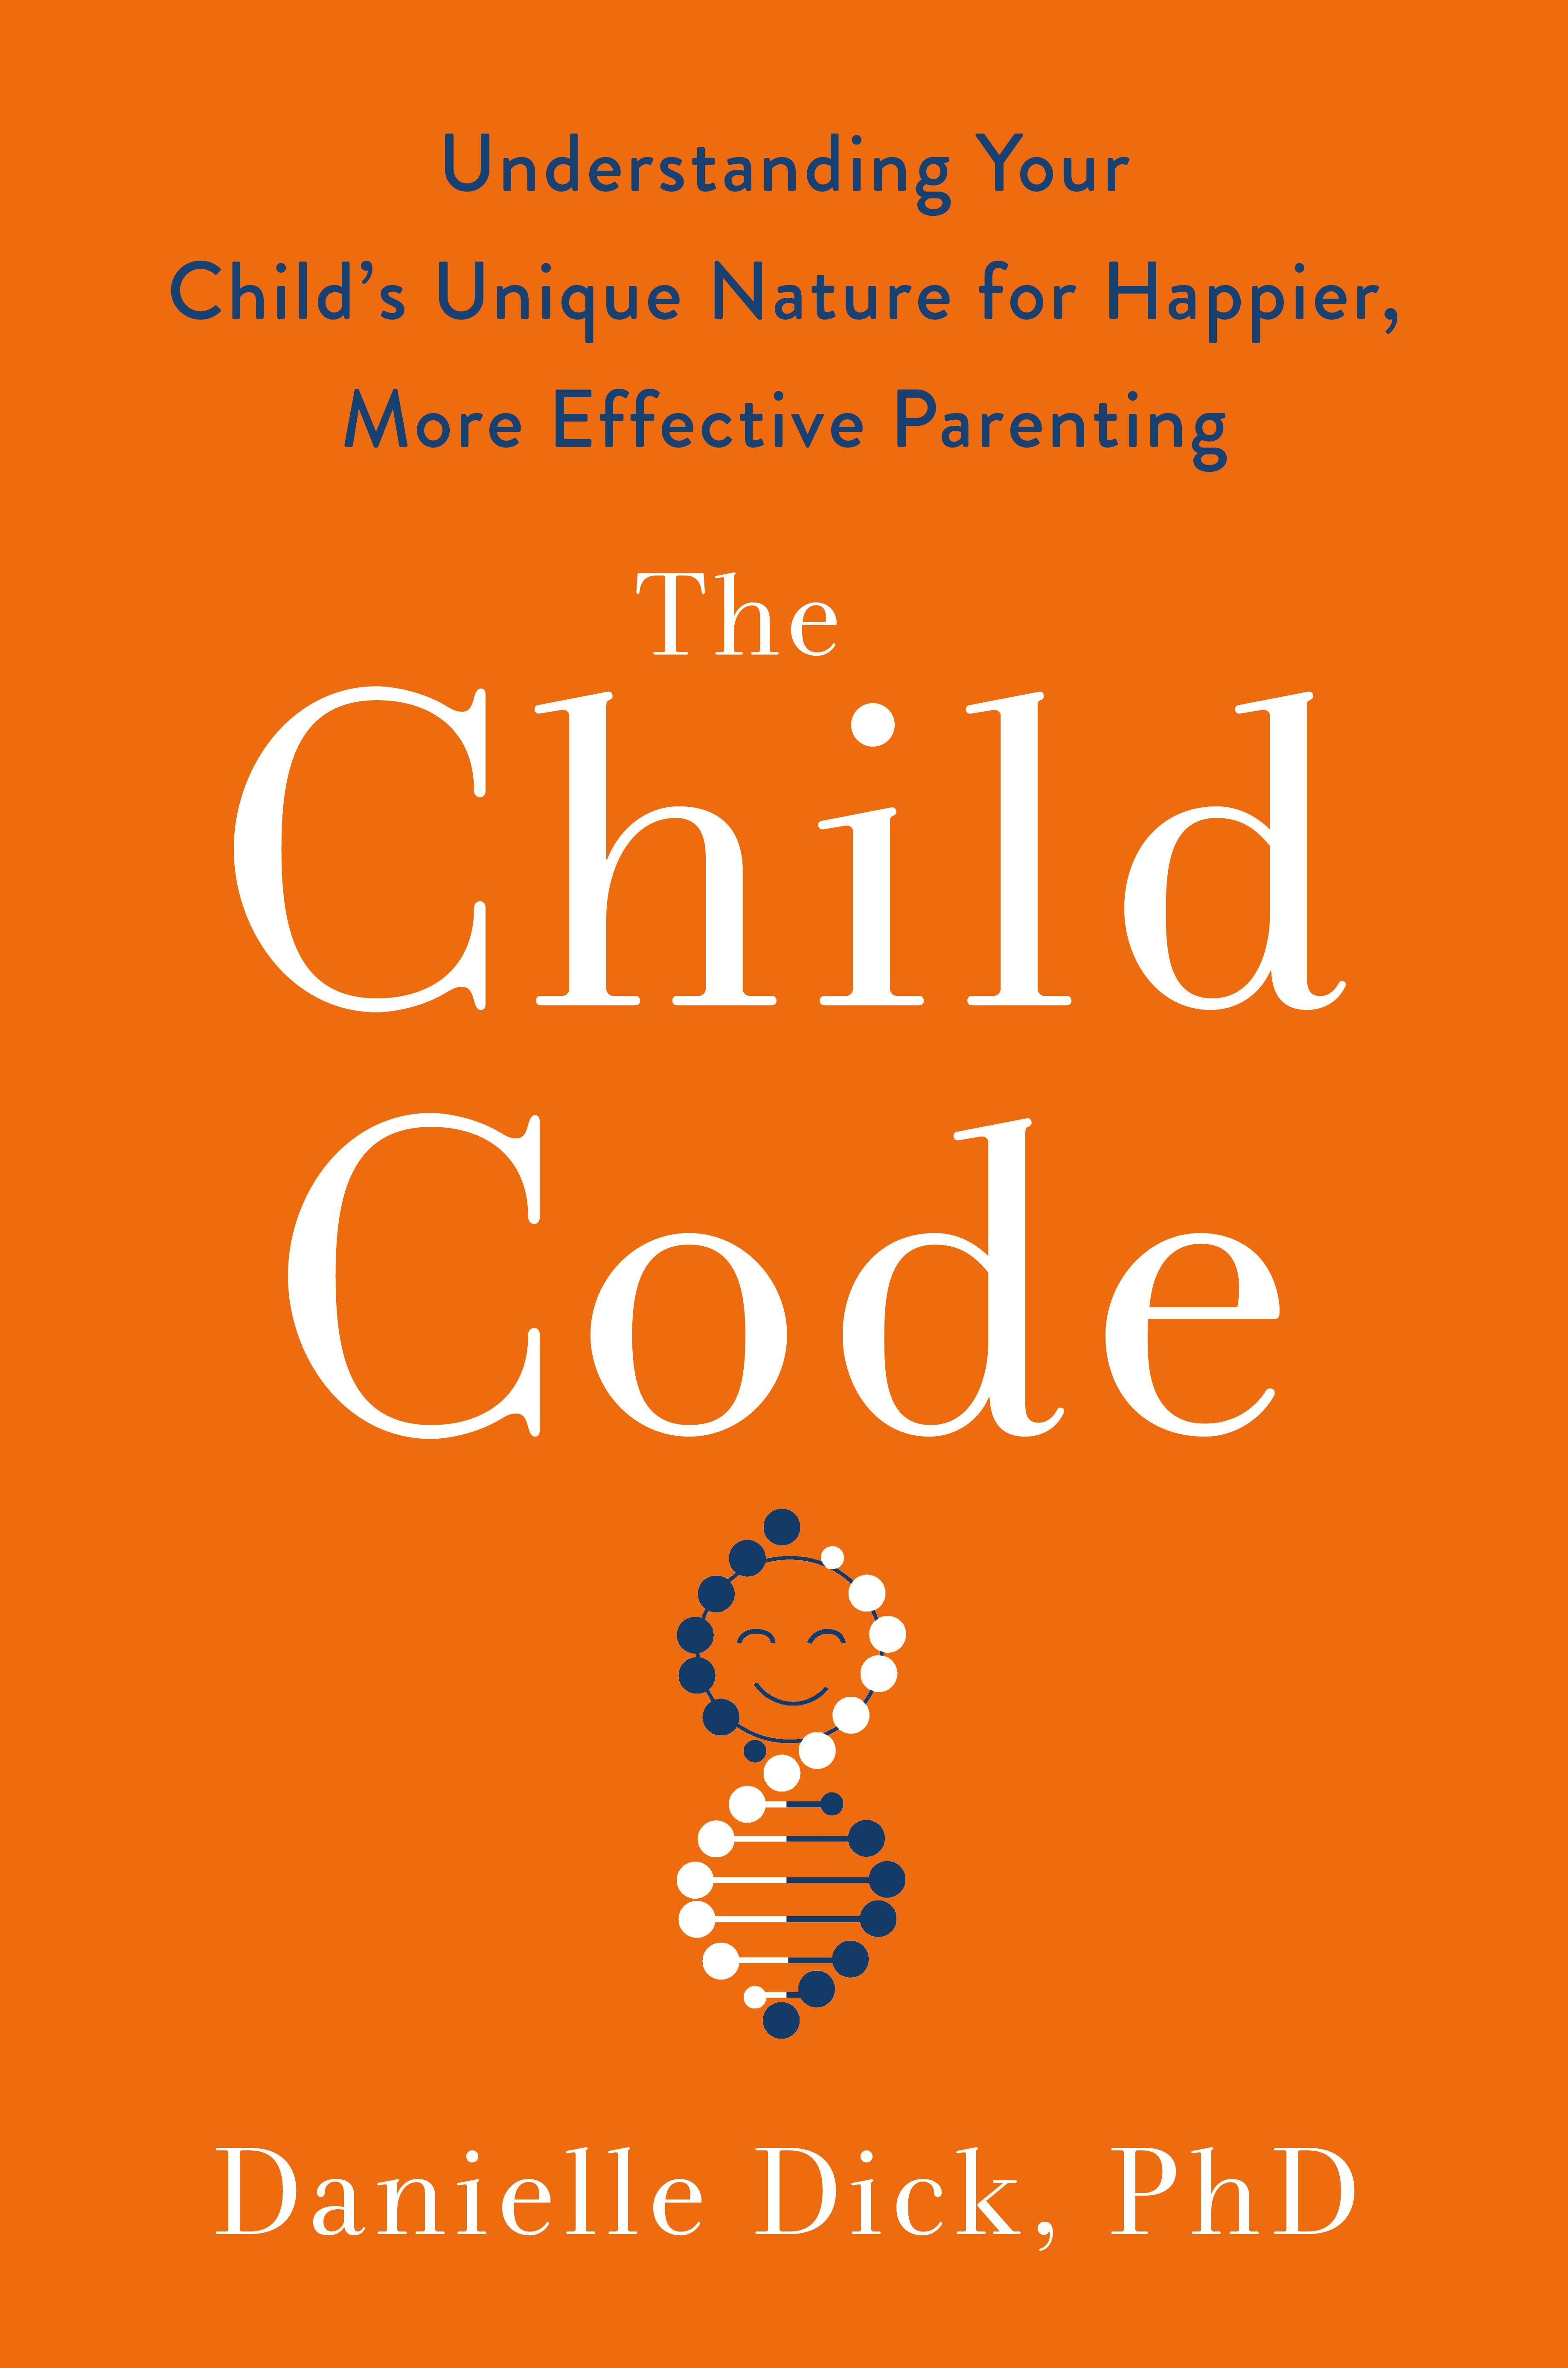 EDGE Lab Director, Dr. Danielle Dick, releases her new book, The Child Code!